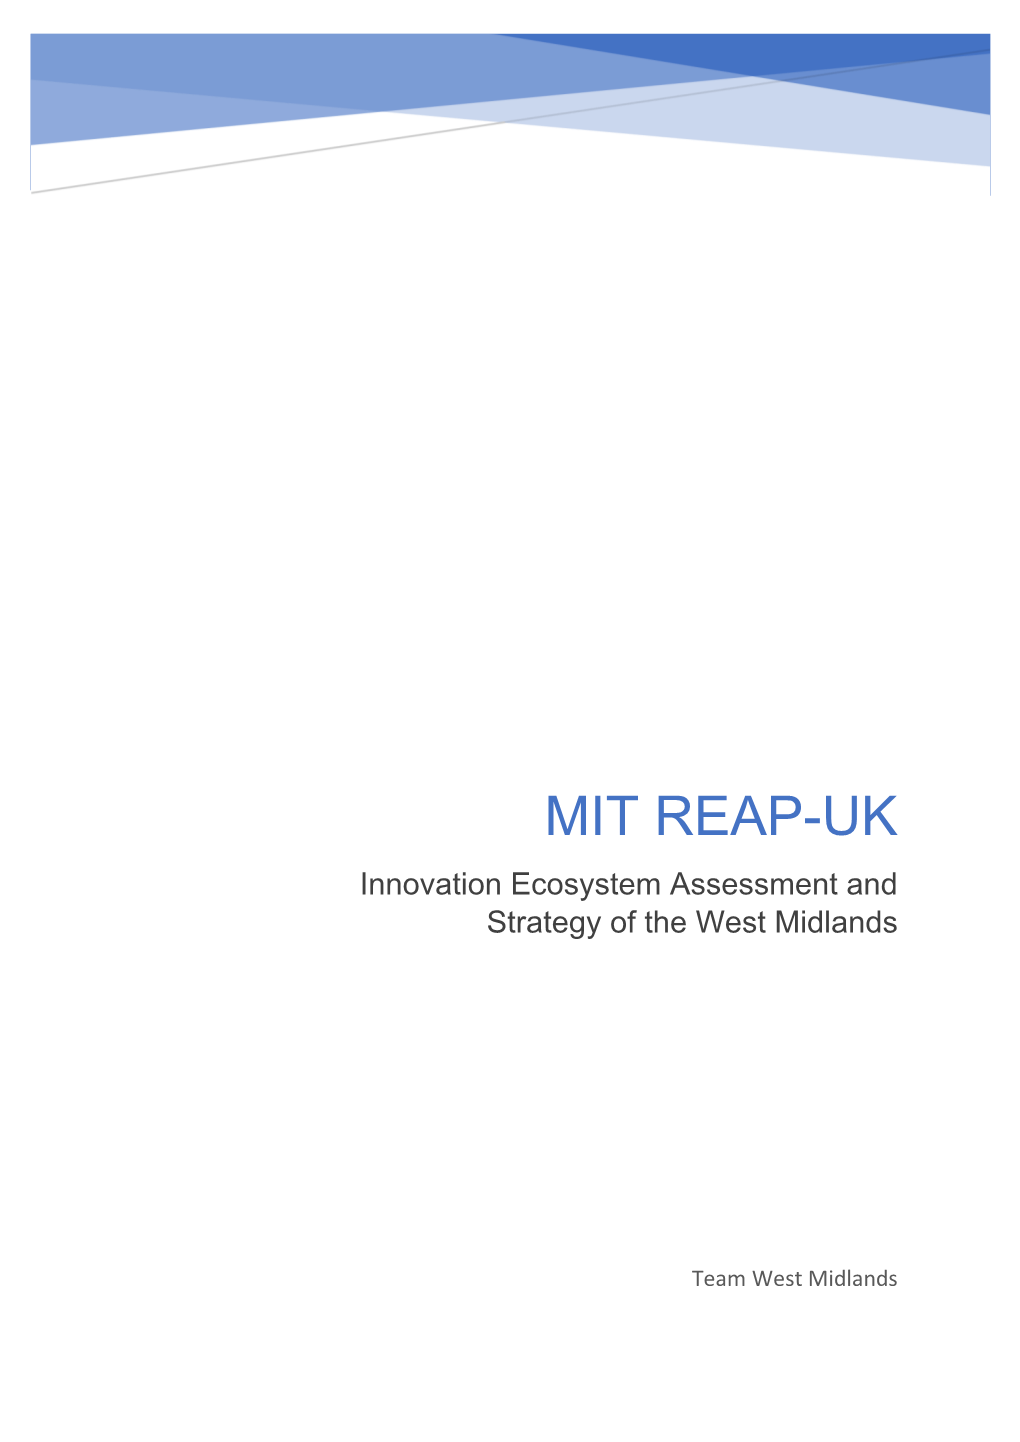 MIT REAP-UK Innovation Ecosystem Assessment and Strategy of the West Midlands